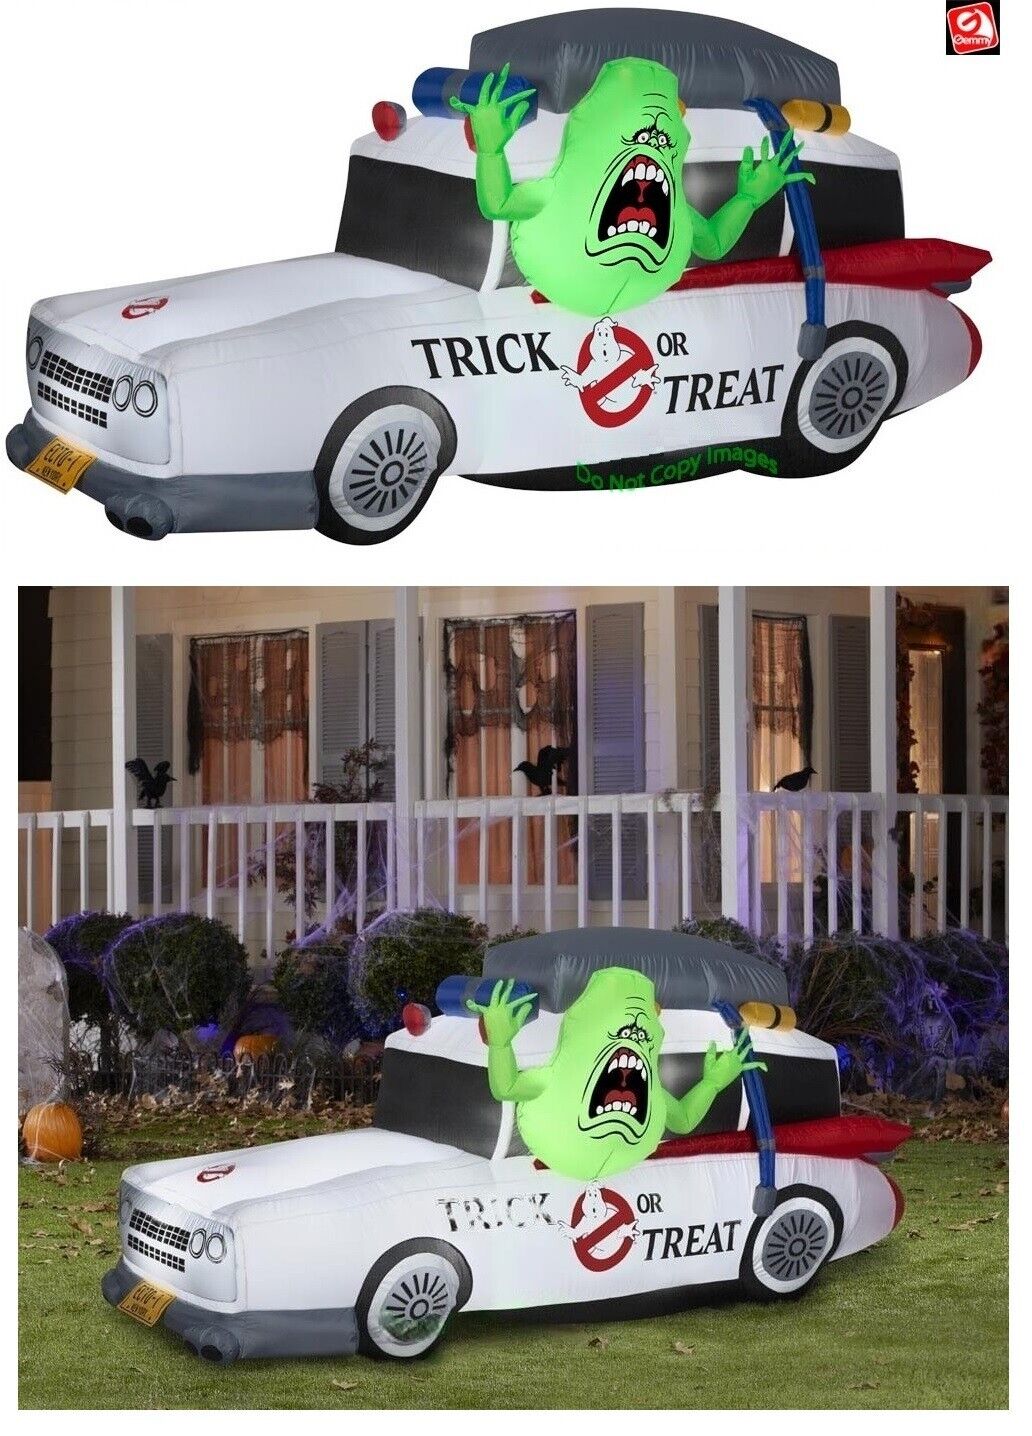 7ft Gemmy Airblown Ghostbusters Ecto-1 Mobile with Slimer Yard Inflatable NEW